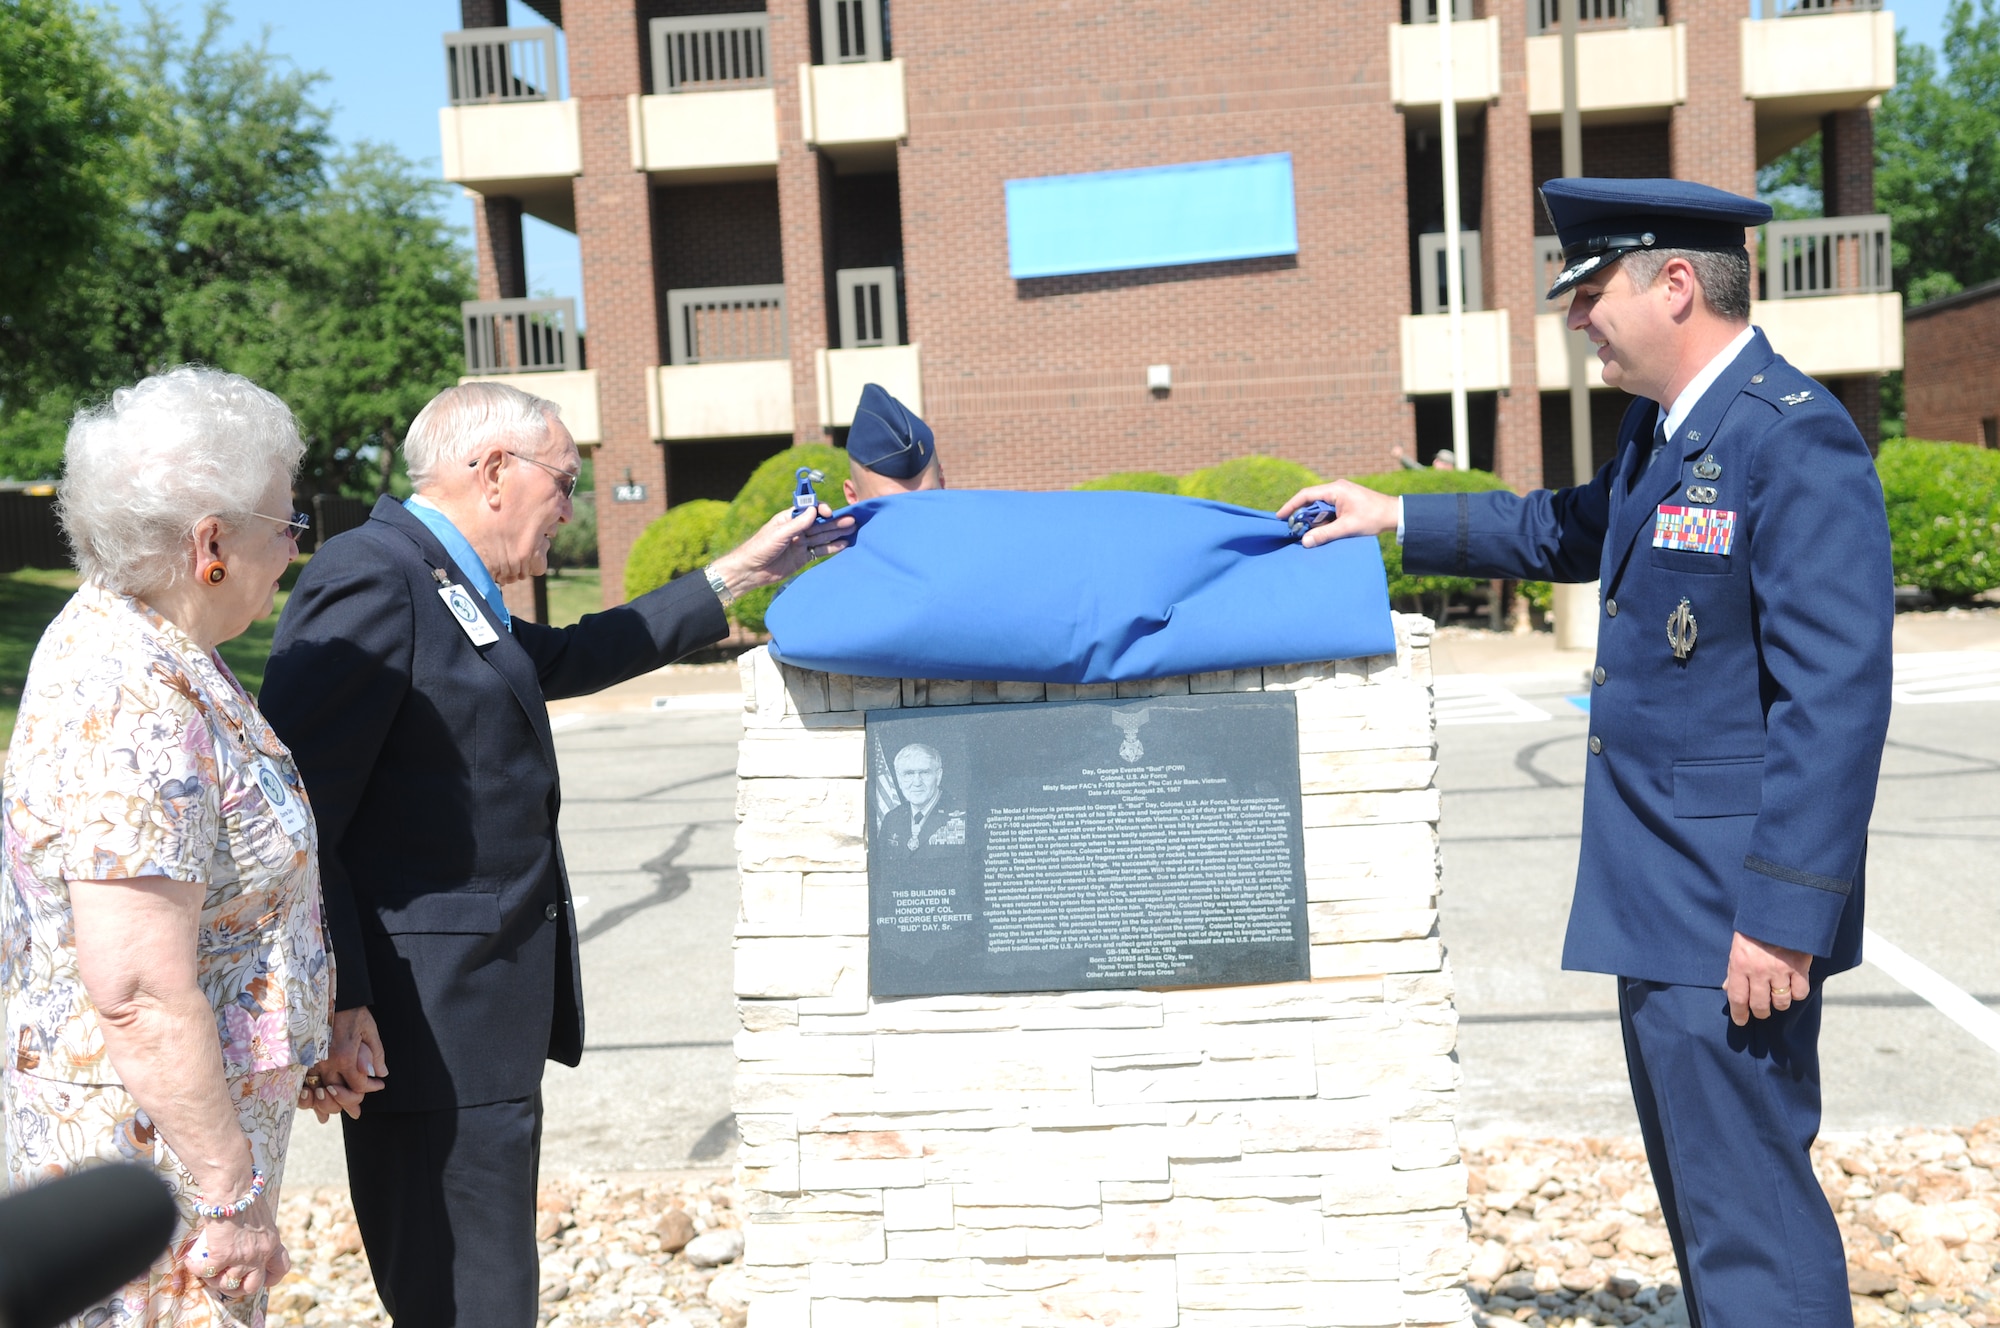 GOODFELLOW AIR FORCE BASE, Texas – Retired Col. George E. “Bud” Day accompanied by his wife Doris, and Colonel Thomas Geary, 17th Training Wing commander, unveil the monolith in front of “Day Manor,” May 7, 2010. Two Visiting Officer Quarters were named in honor of retired Air Force Colonels George Day and Leo K. Thorsness, both of whom received the Medal of Honor for actions while serving in Vietnam. (U.S. Air Force photo/Airman 1st Class Clayton Lenhardt)